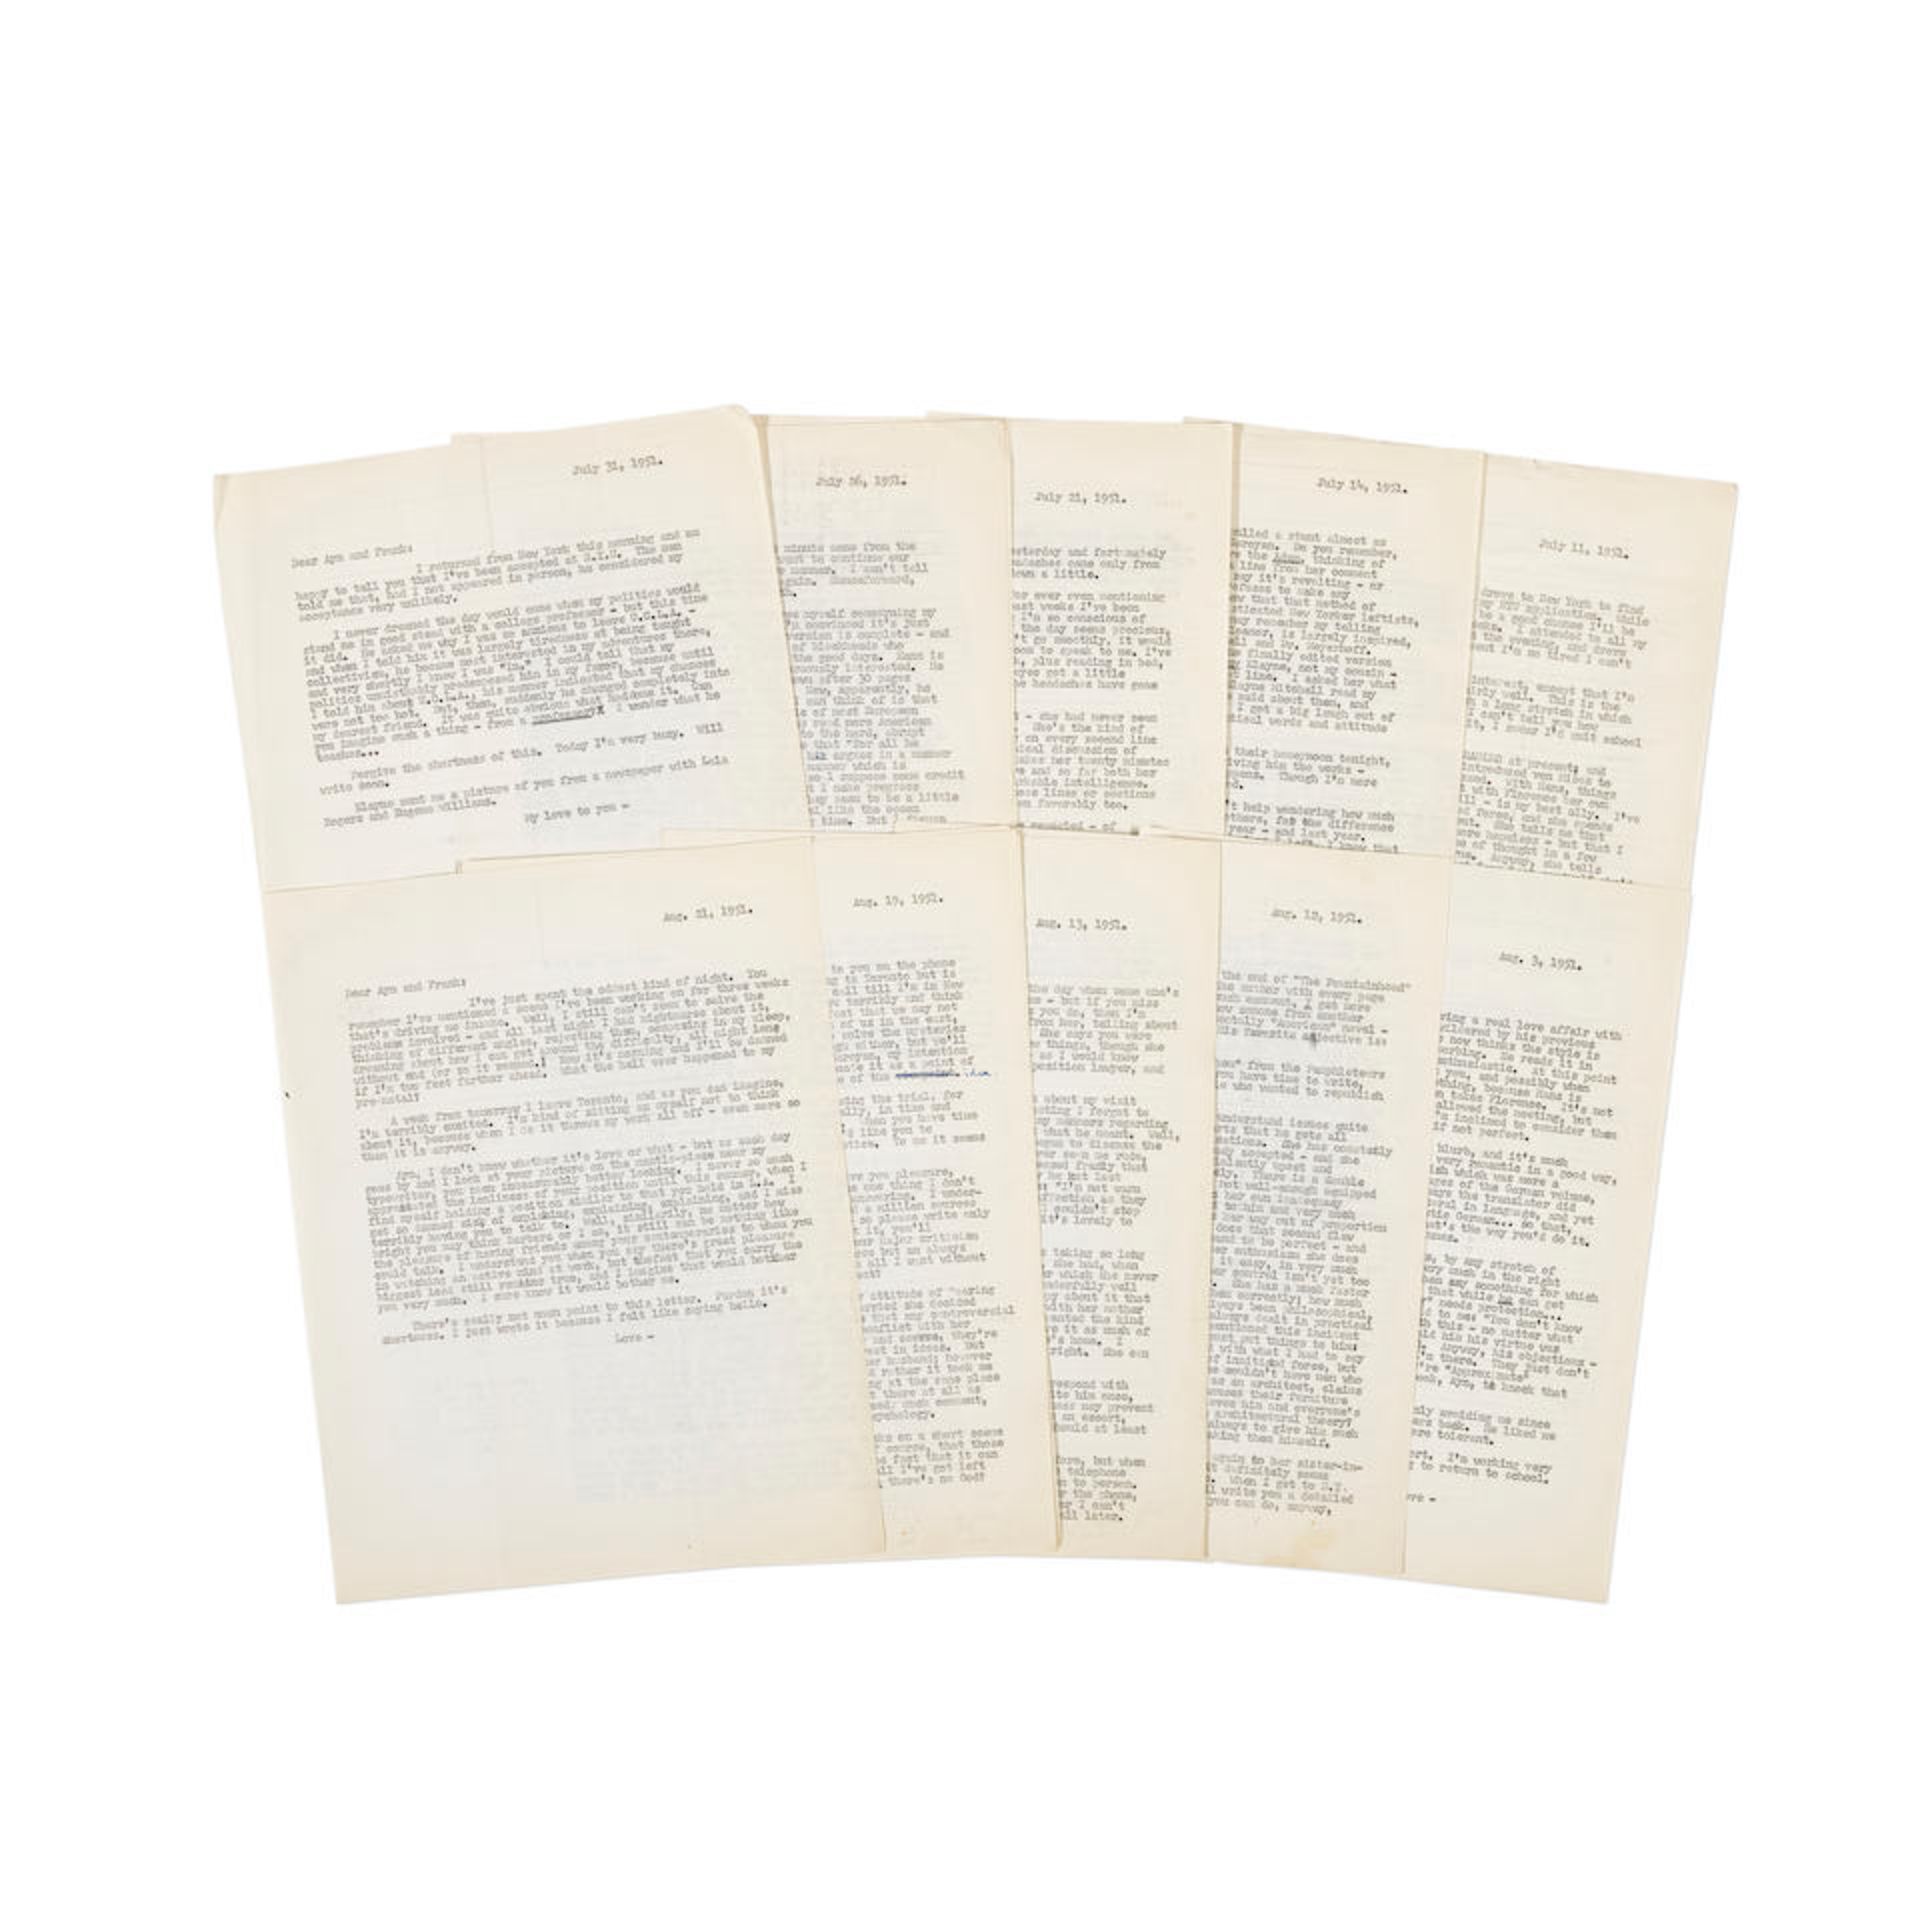 ARCHIVE OF NATHANIEL BRANDEN'S RETAINED CORRESPONDENCE TO NOVELIST AYN RAND. [RAND, AYN], and NA...